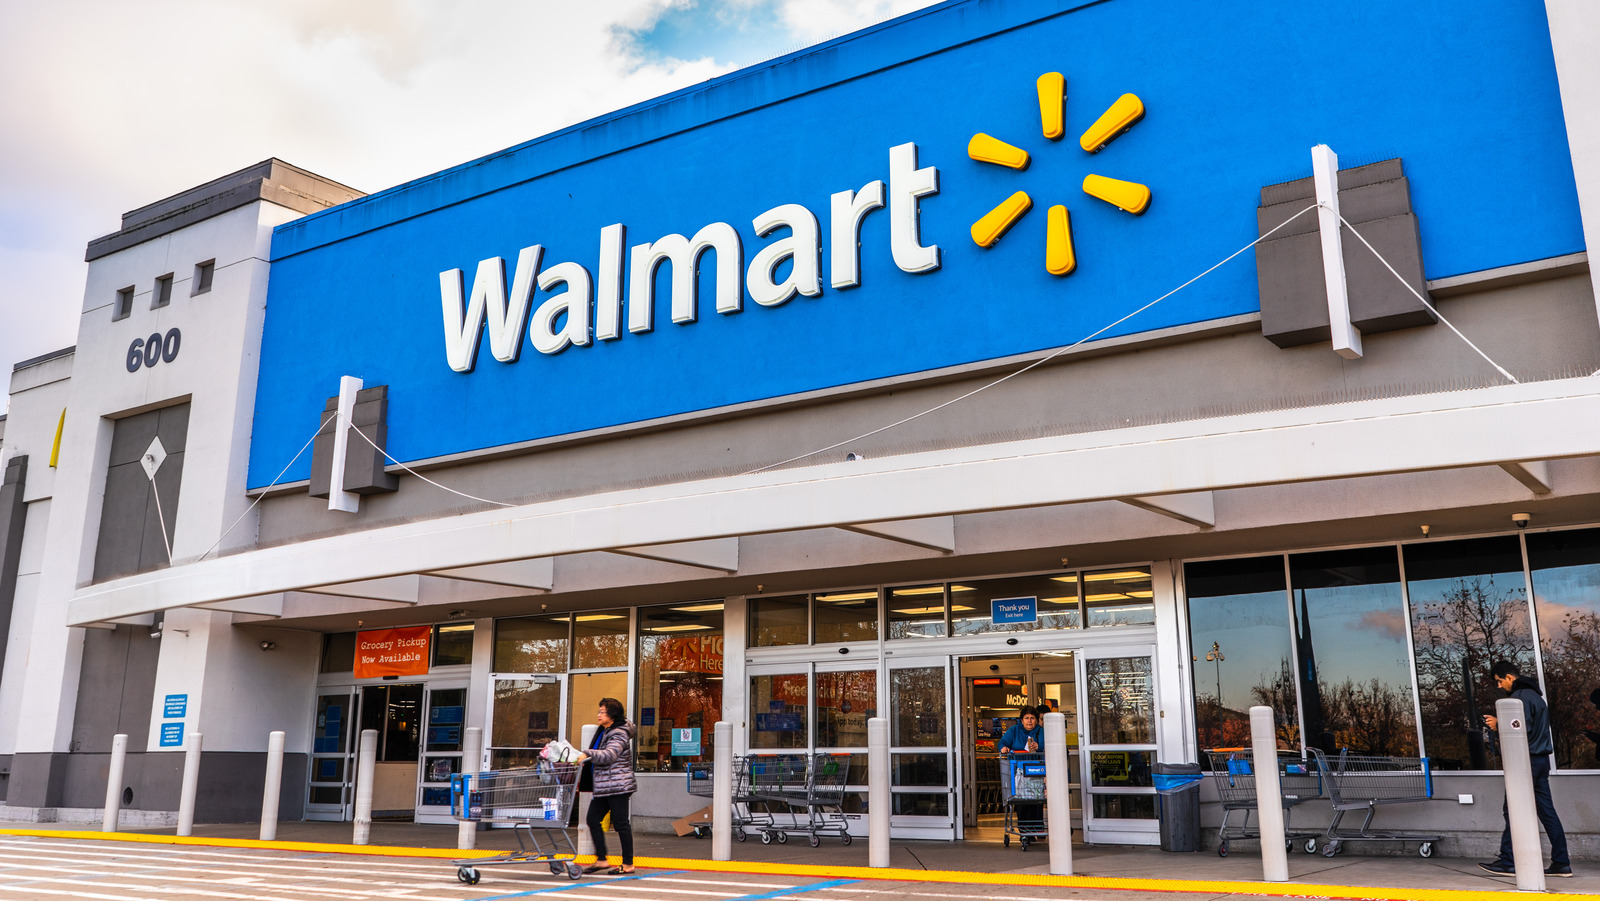 The U.S. City With More Walmarts Than Any Other